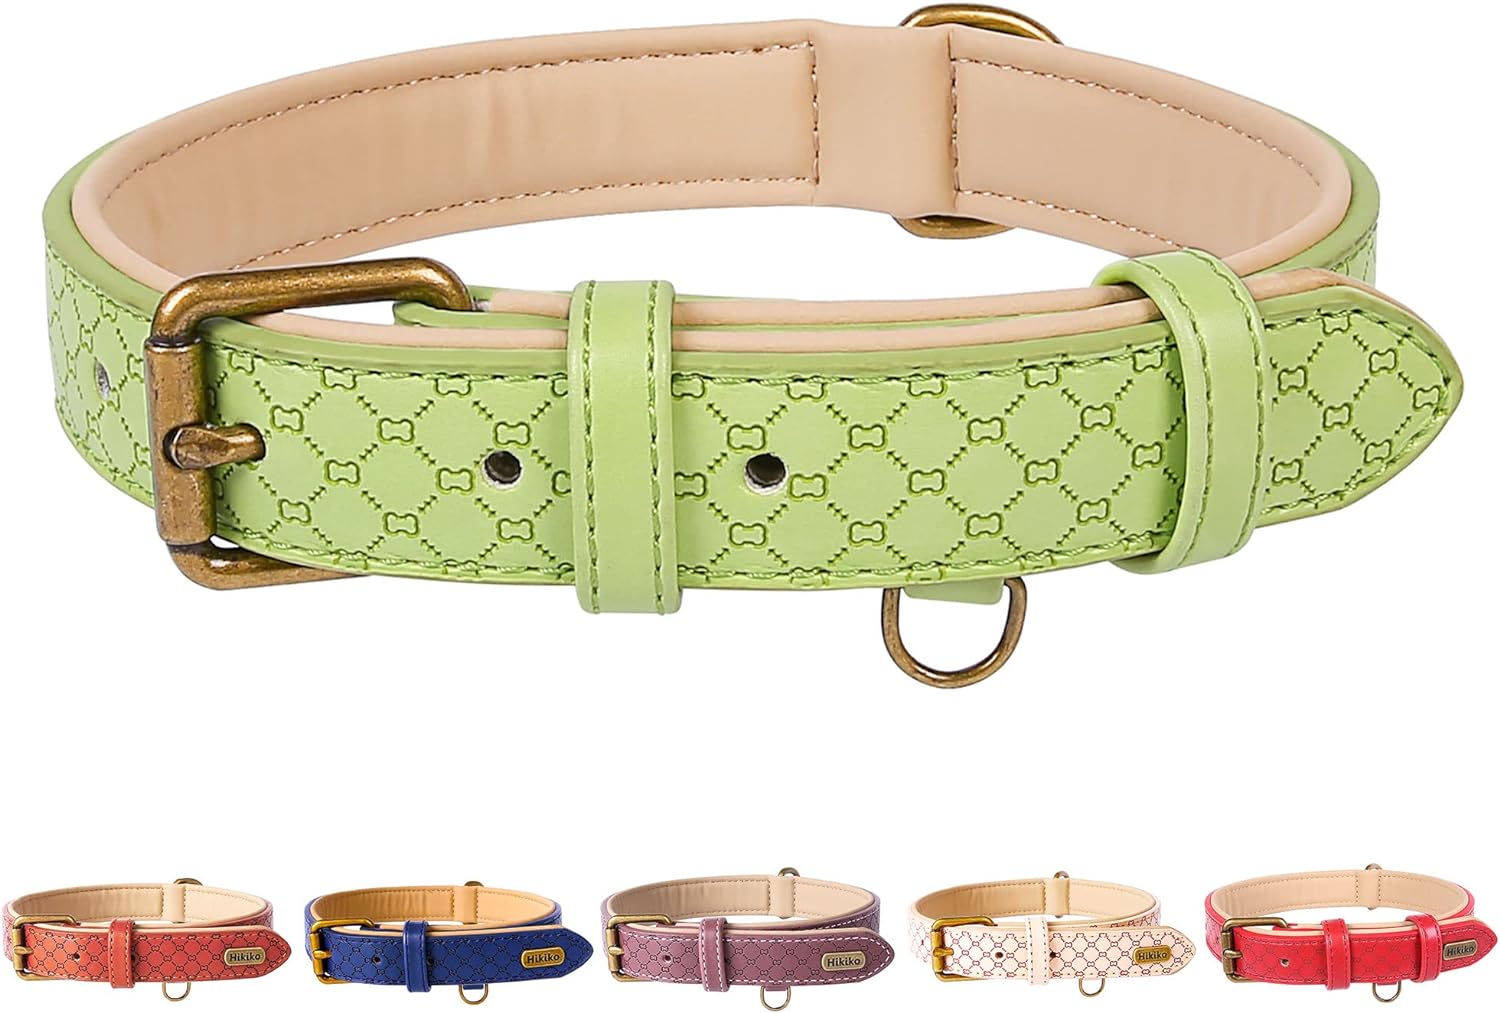 Basic Classic Luxury Padded Leather Dog Collar - Rust Proof Brass Strong Leather Collar Heavy Duty Alloy Hardware Best for Small, Medium, Large Dogs